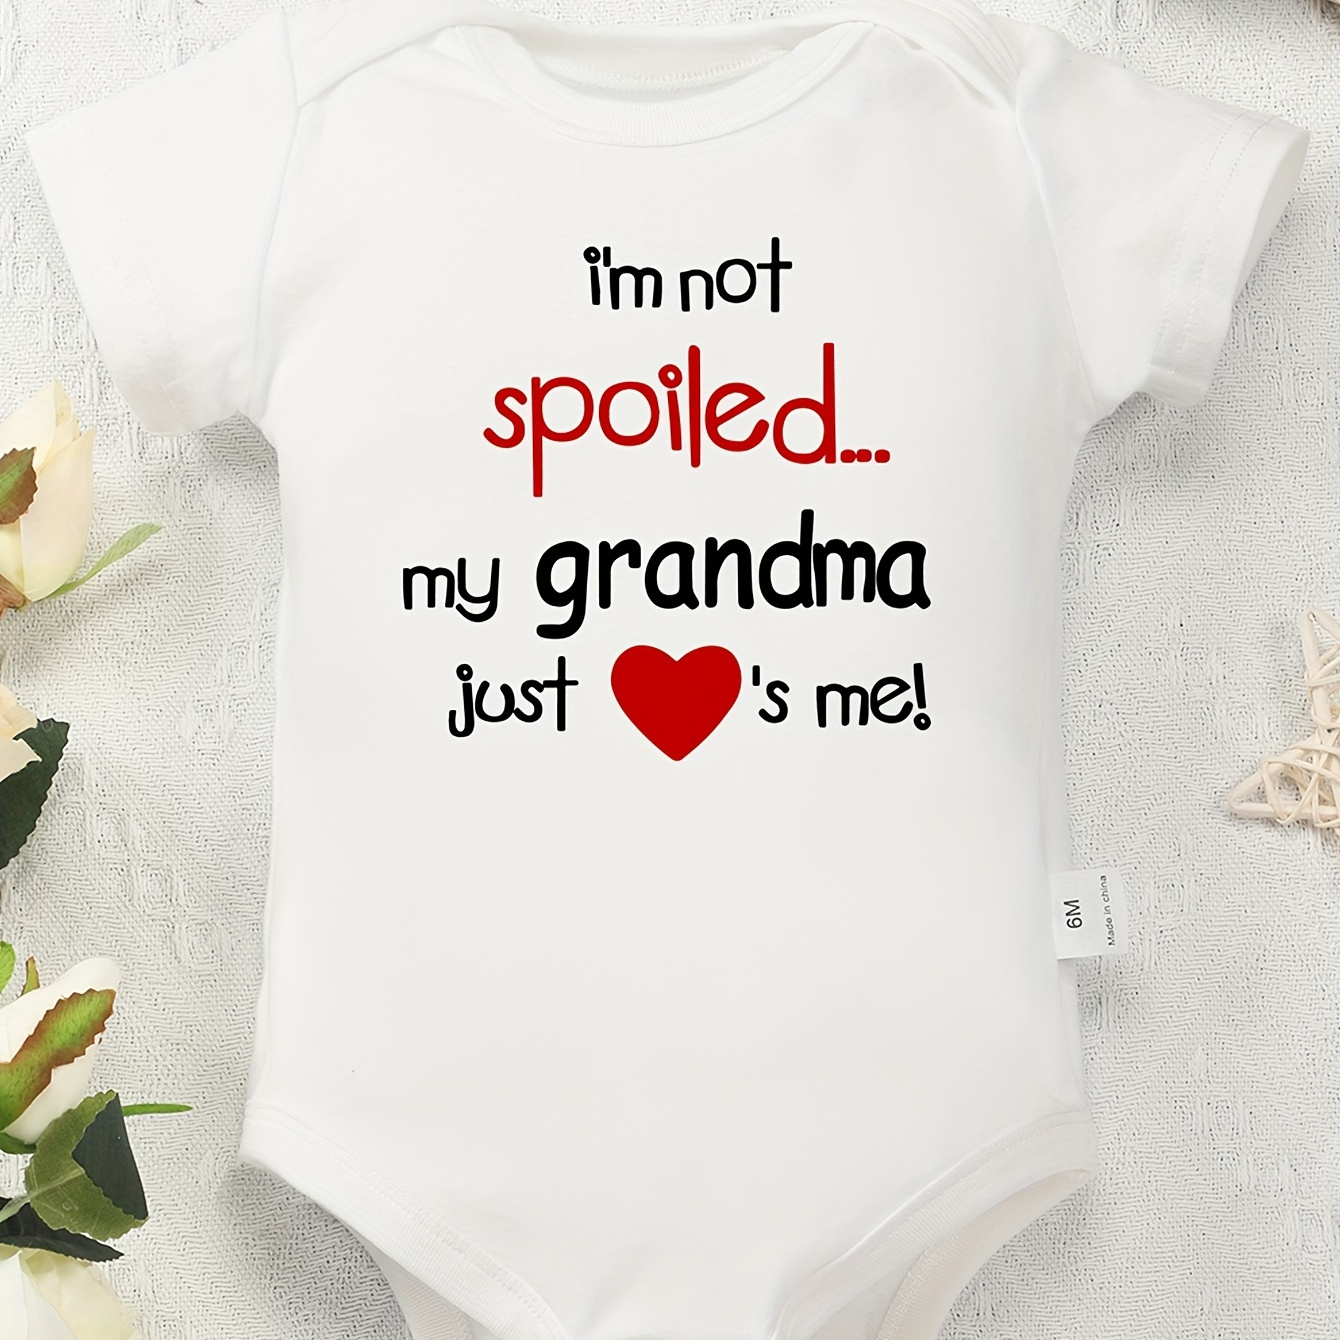 

100% Pure Cotton Baby Onesies "i'm Not Spoiled My Grandma Just Loves Me" Letter Print, Soft Casual Round Neck Baby Romper